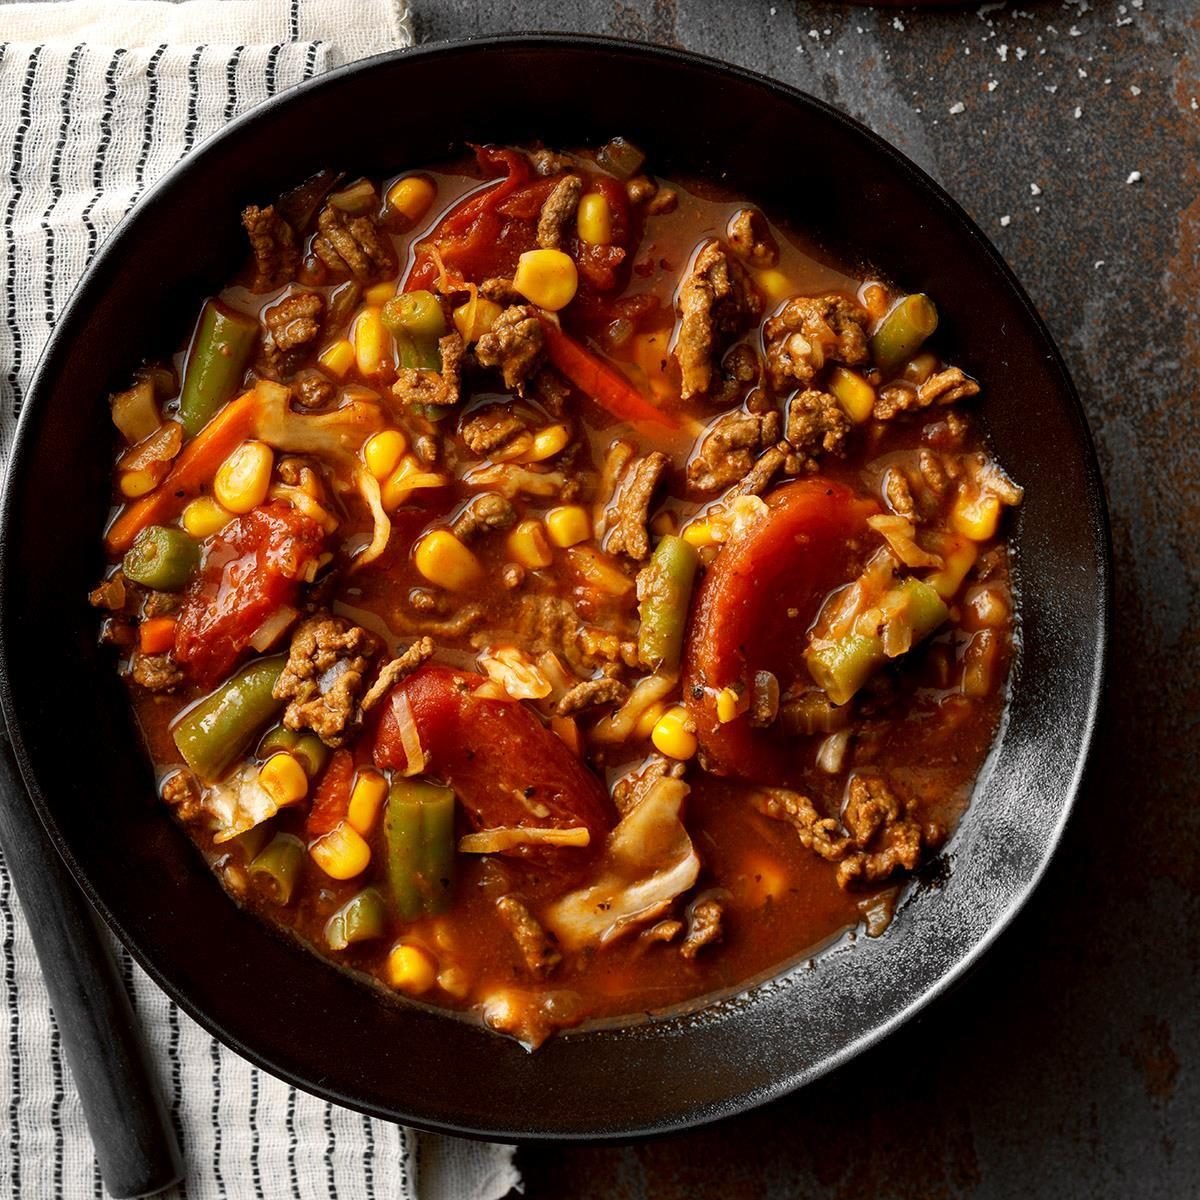 Vegetable Soup with Hamburger